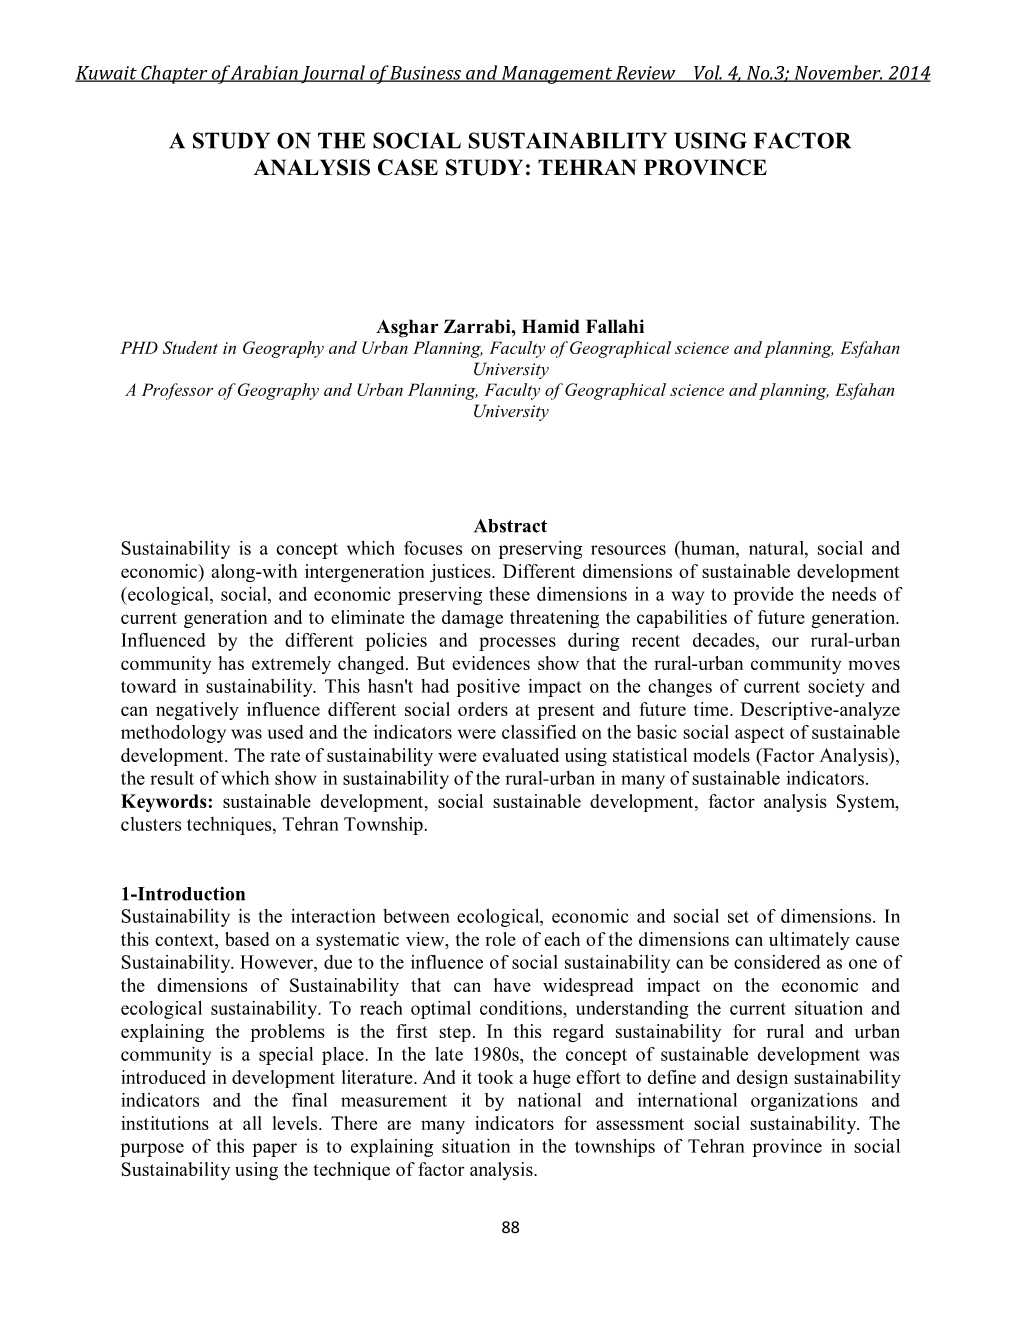 A Study on the Social Sustainability Using Factor Analysis Case Study: Tehran Province